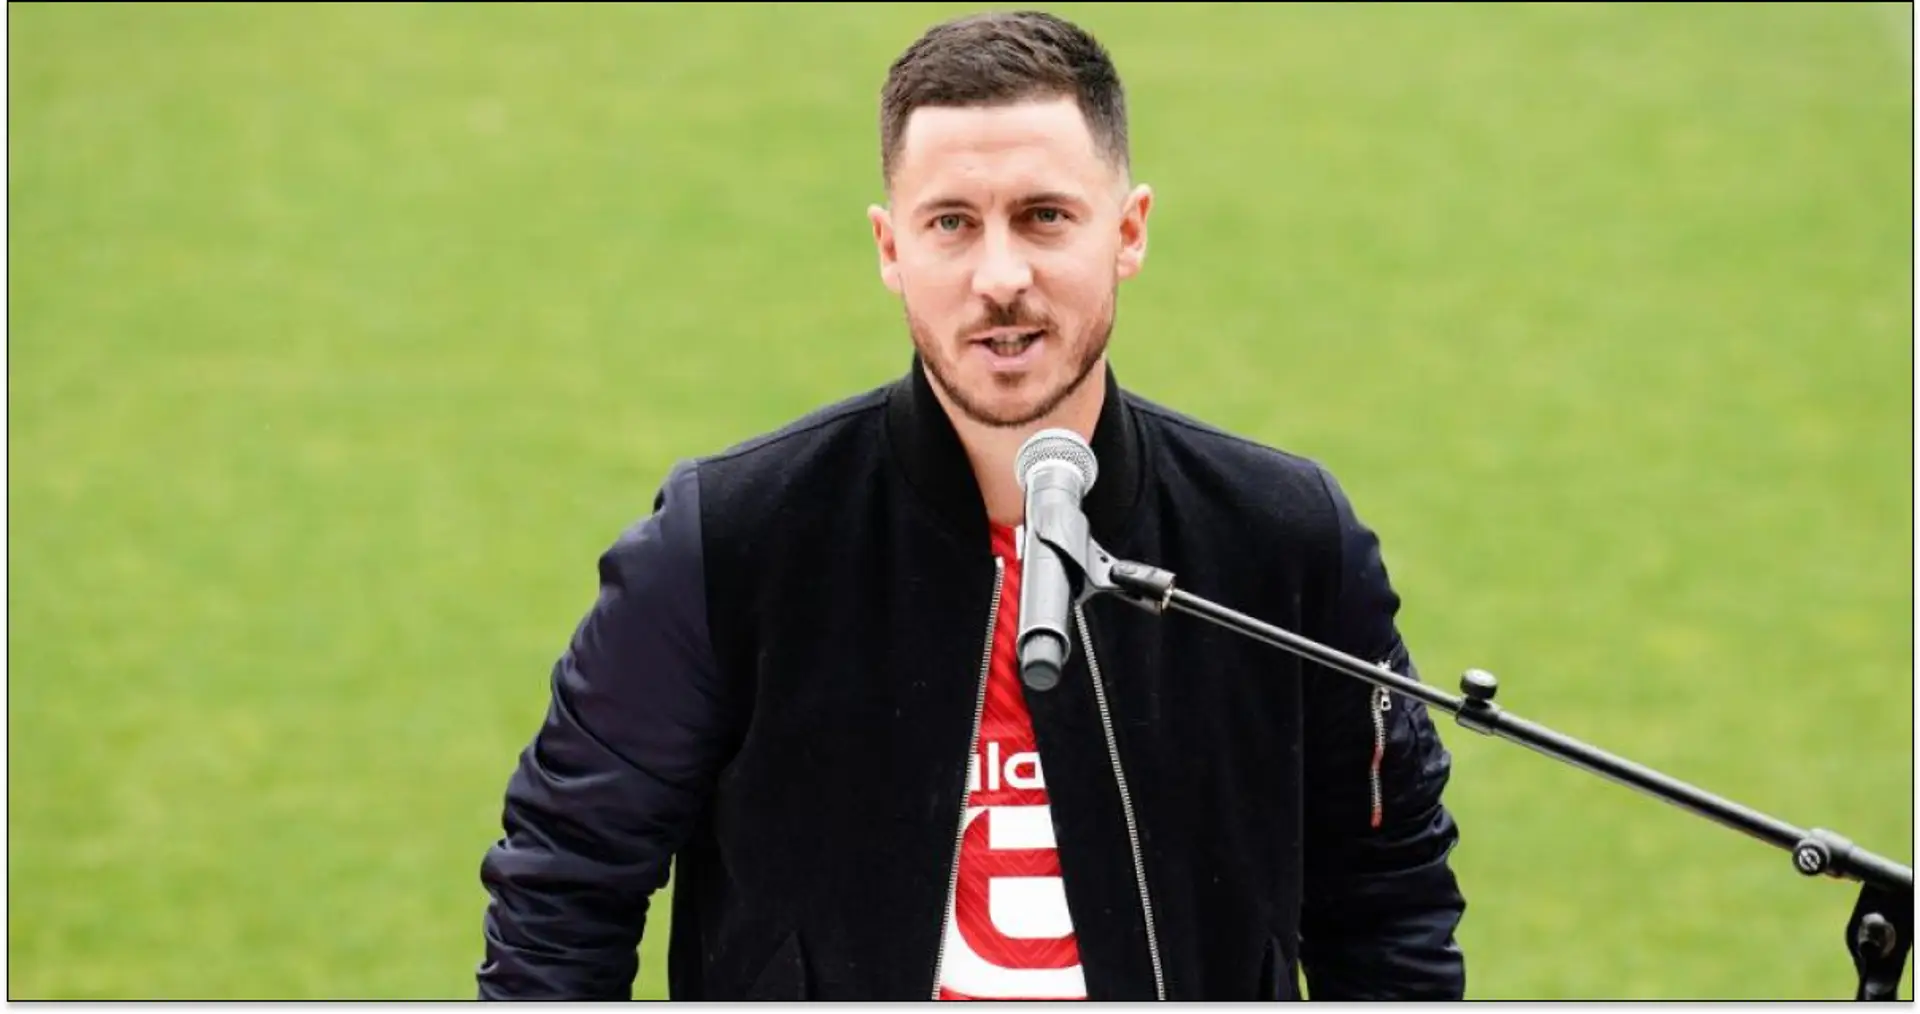 'This is Eden Hazard pitch so no gym, no running': Chelsea legend unveils pitch named after him